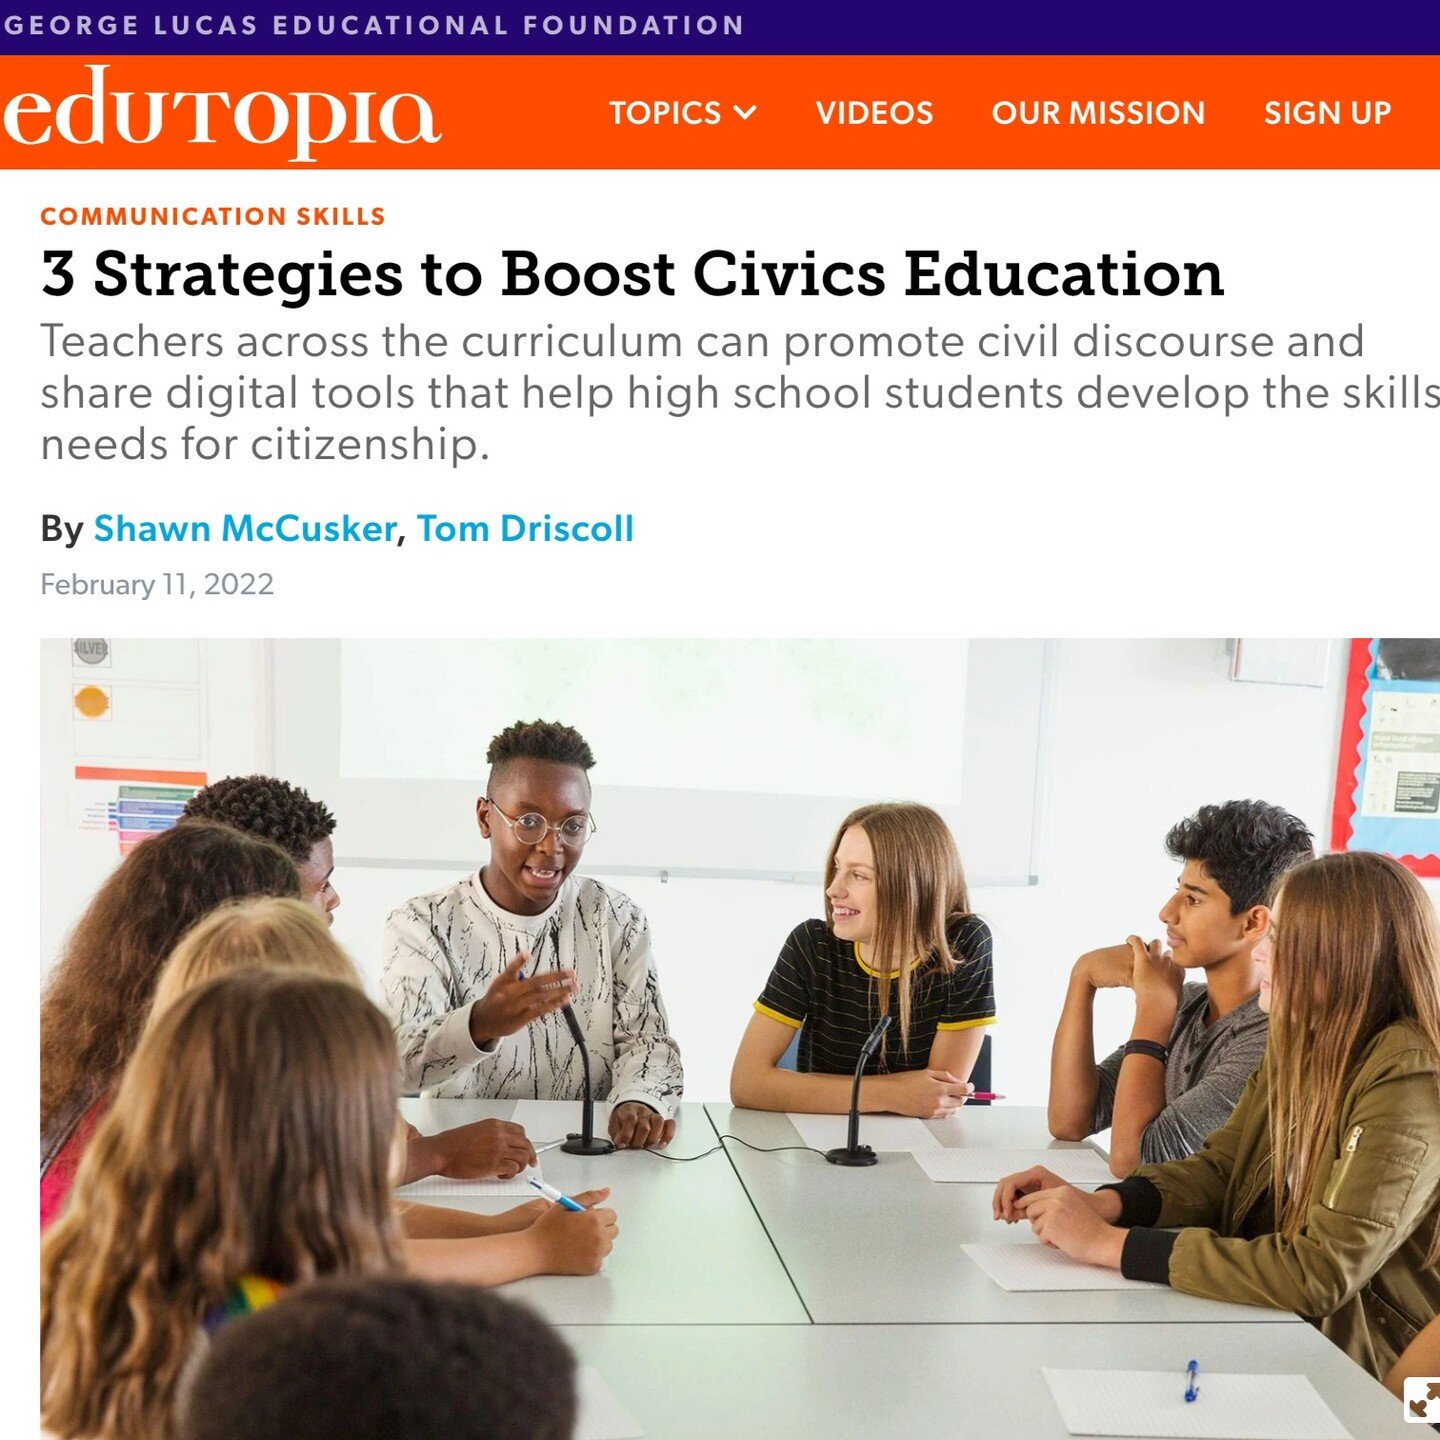 Excited to have my first contribution to @edutopia published! @smc617 &amp; I highlight some of the core strategies and go-to resources that we believe can help take civics education to the next level. Link in bio.